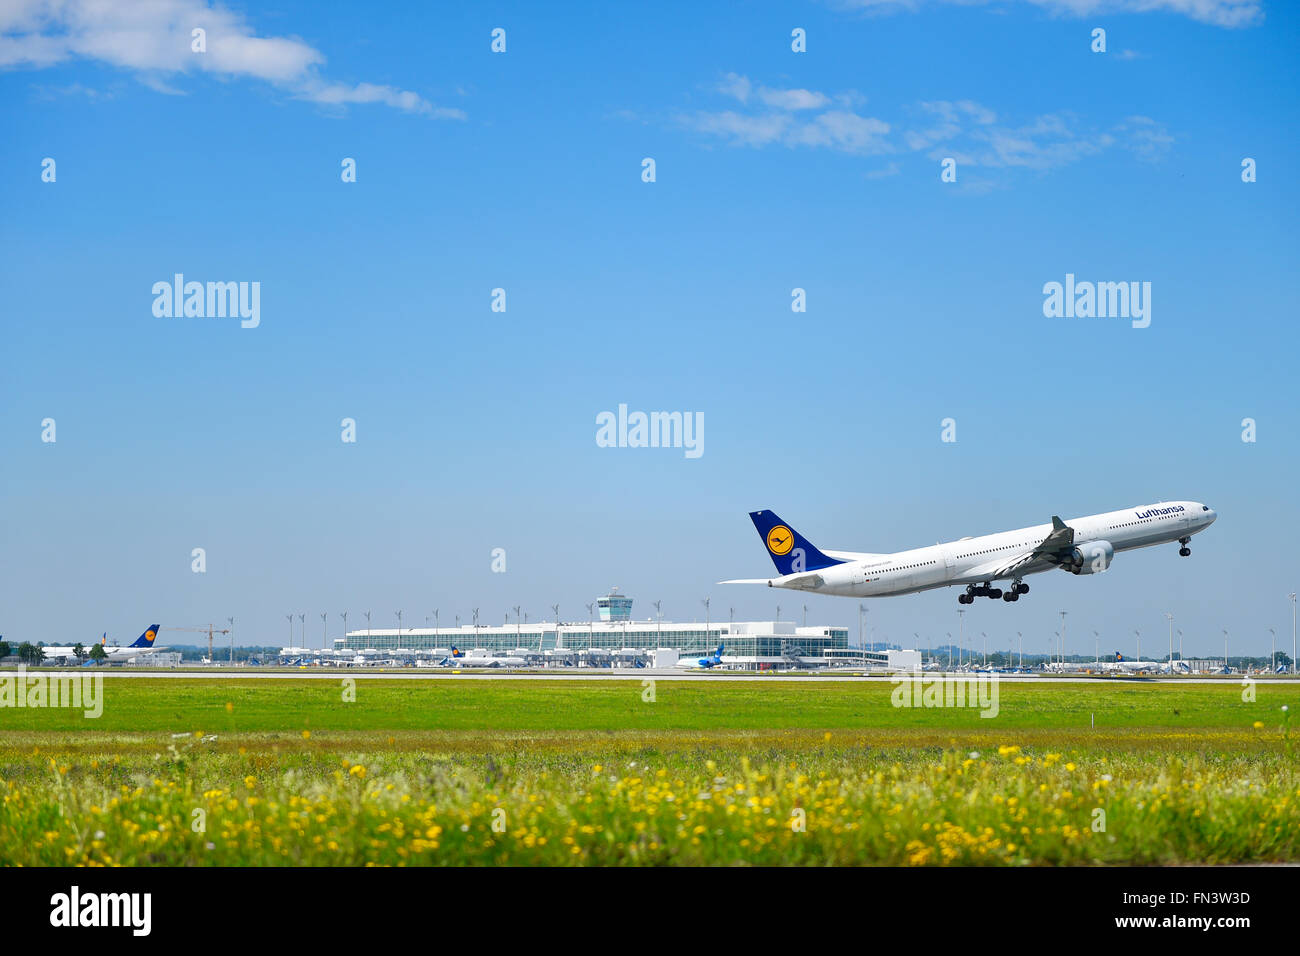 Lufthansa, LH, Airbus, A 340, 600, A340-600, take of, take off, aircraft, airport, overview, panorama, view, aircraft, airplane, Stock Photo